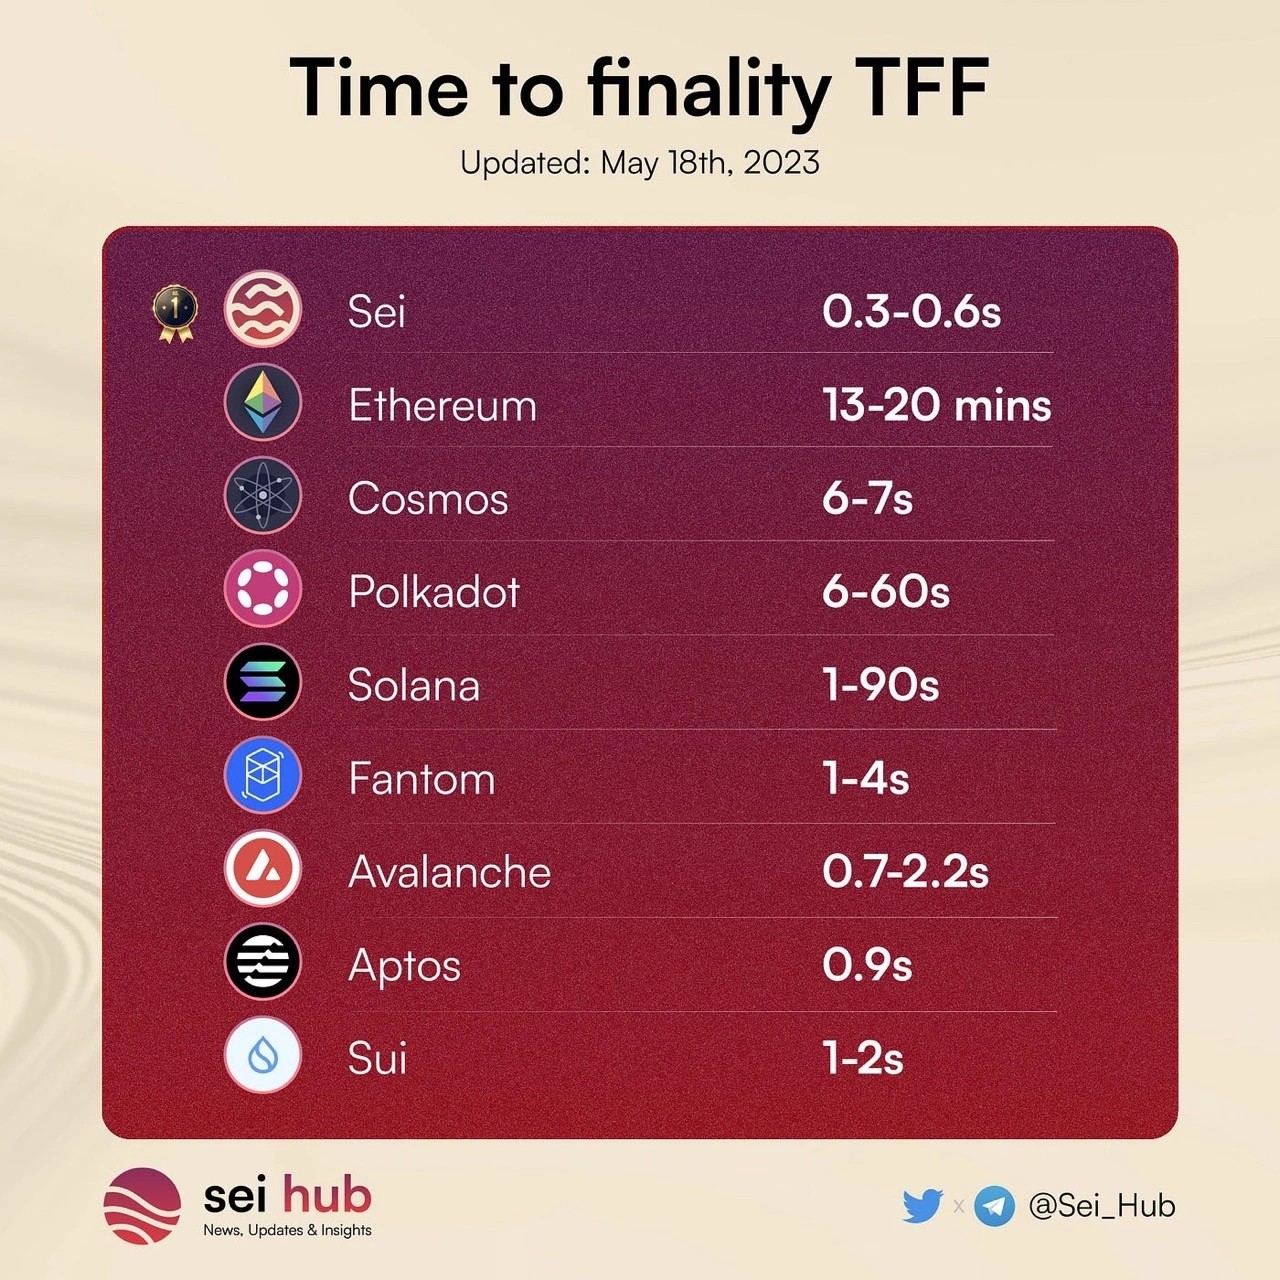 A table comparing SEI TFF to the TFFs of ETH, DOT, SOL and many more...